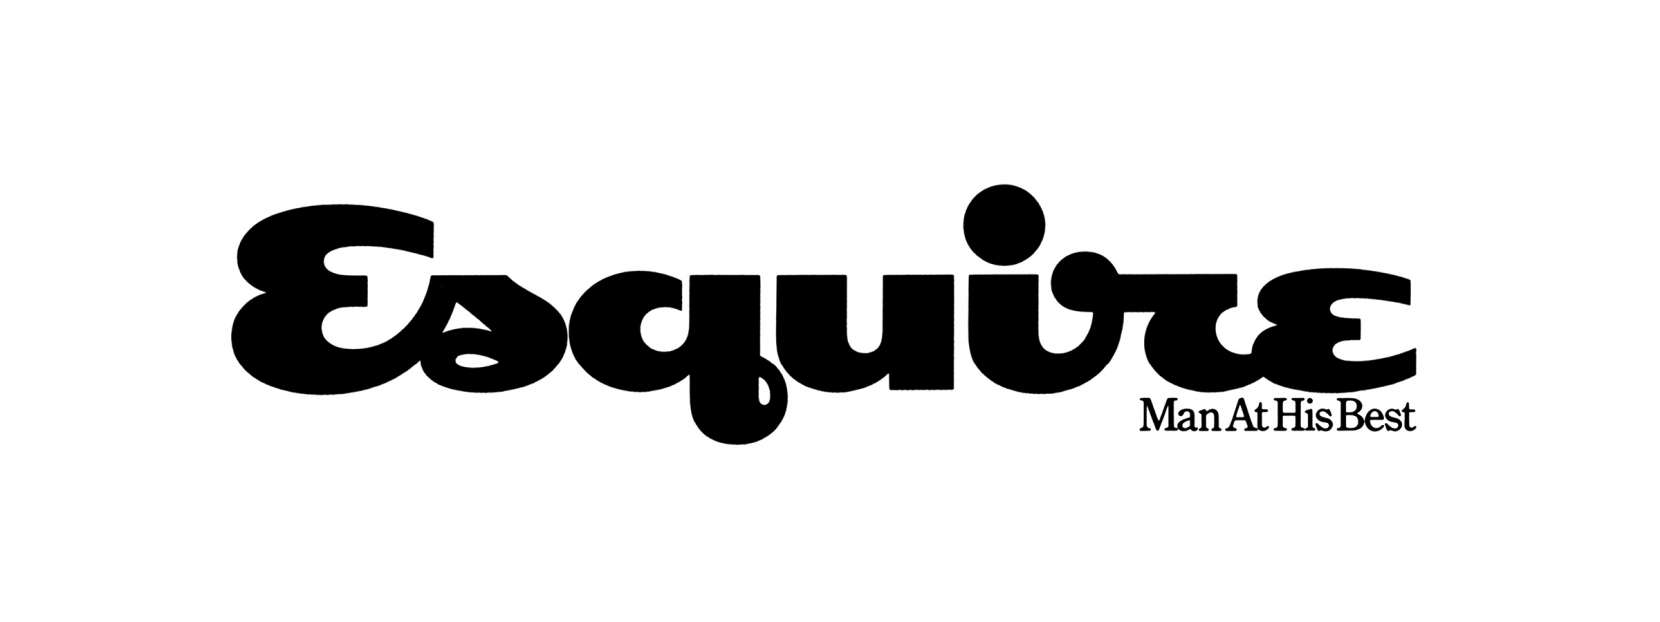 Logos_LargeView_Esquire1-1660x622